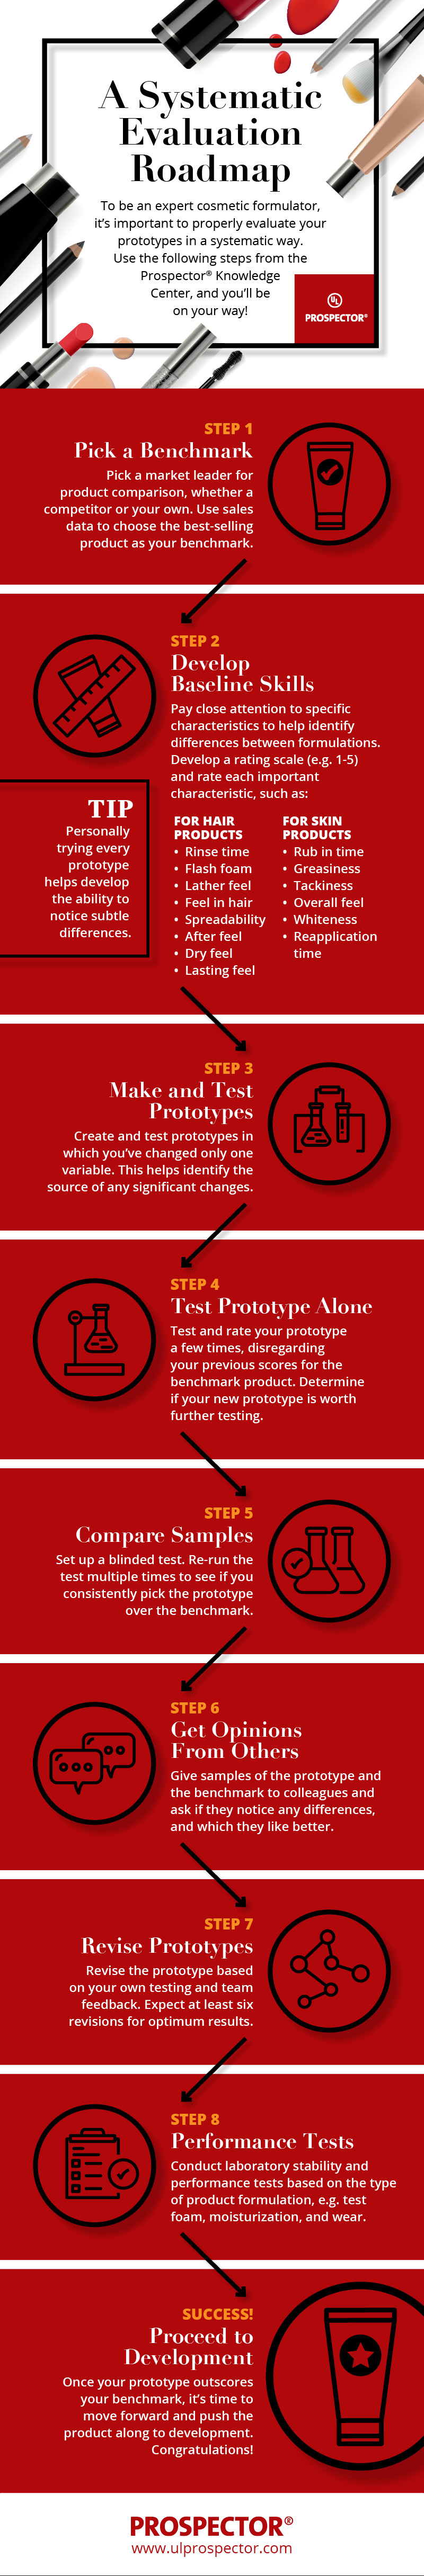 [INFOGRAPHIC] To be an expert cosmetic formulator, it's important to properly evaluate your prototypes for desired results. Find five steps walk you through the process on the Prospector Knowledge Center.